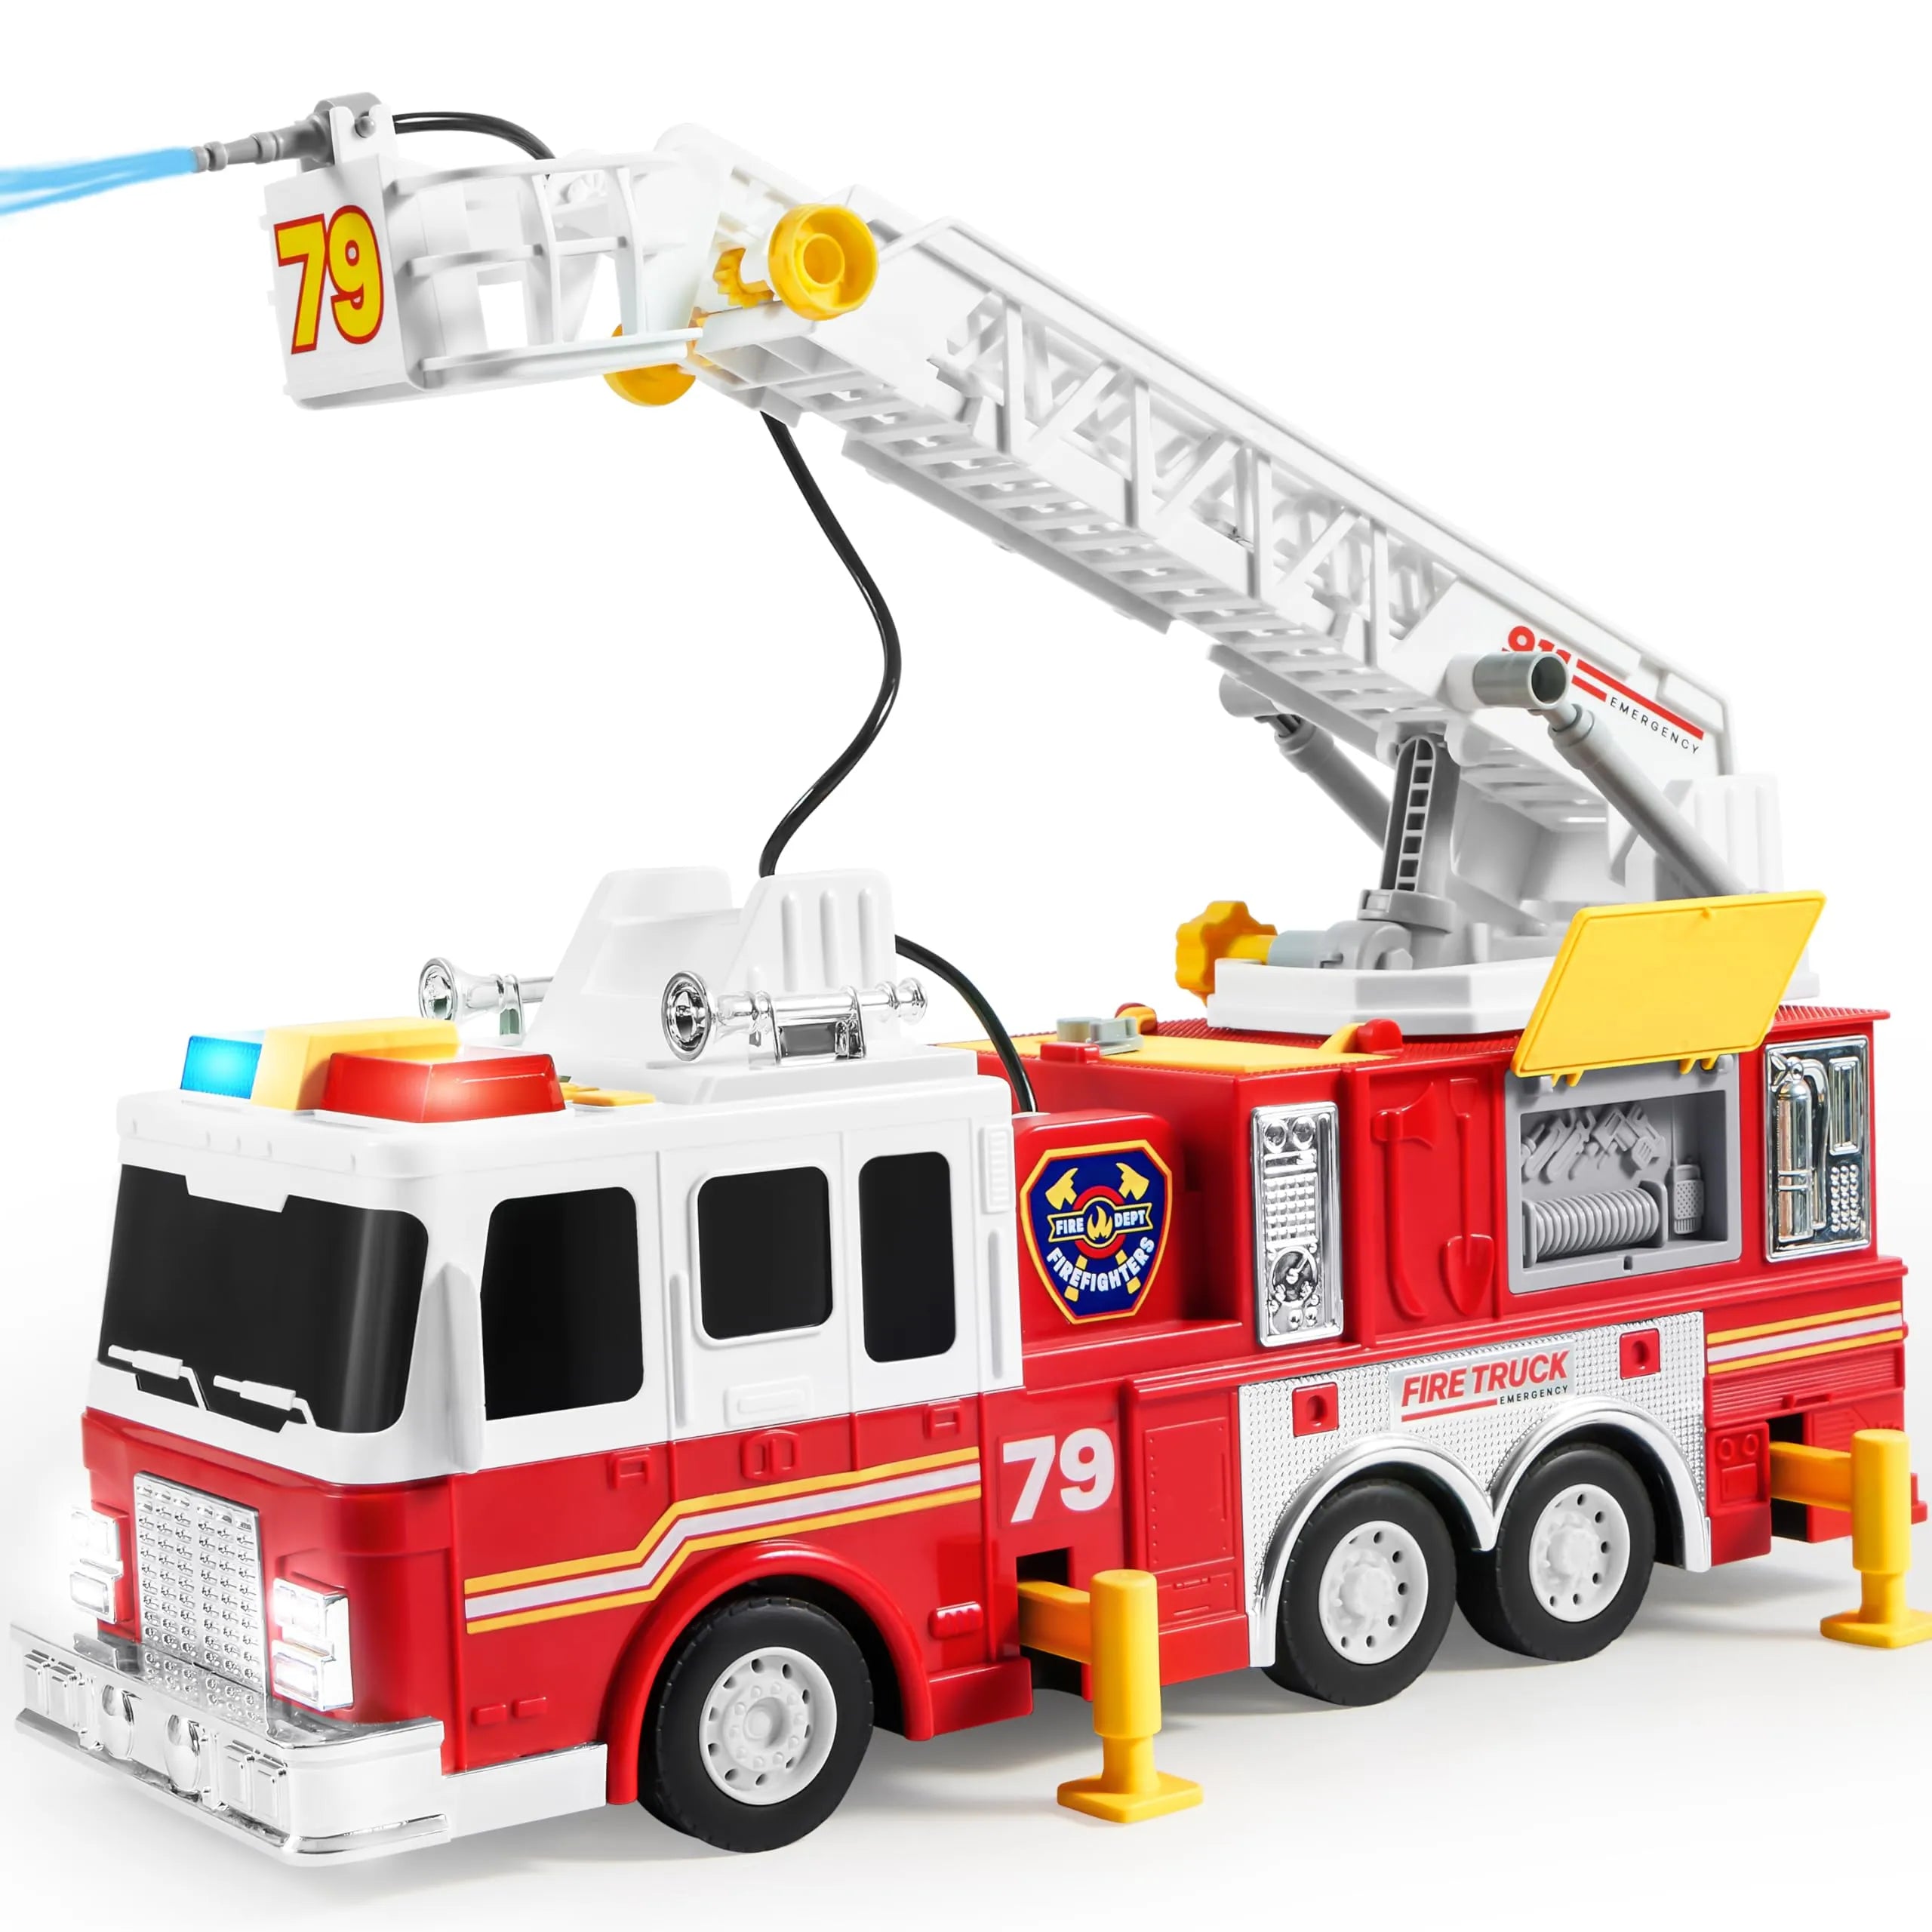 Extra Large Size Fire Truck Toys for Boys with 33-inch Ladder Gift For